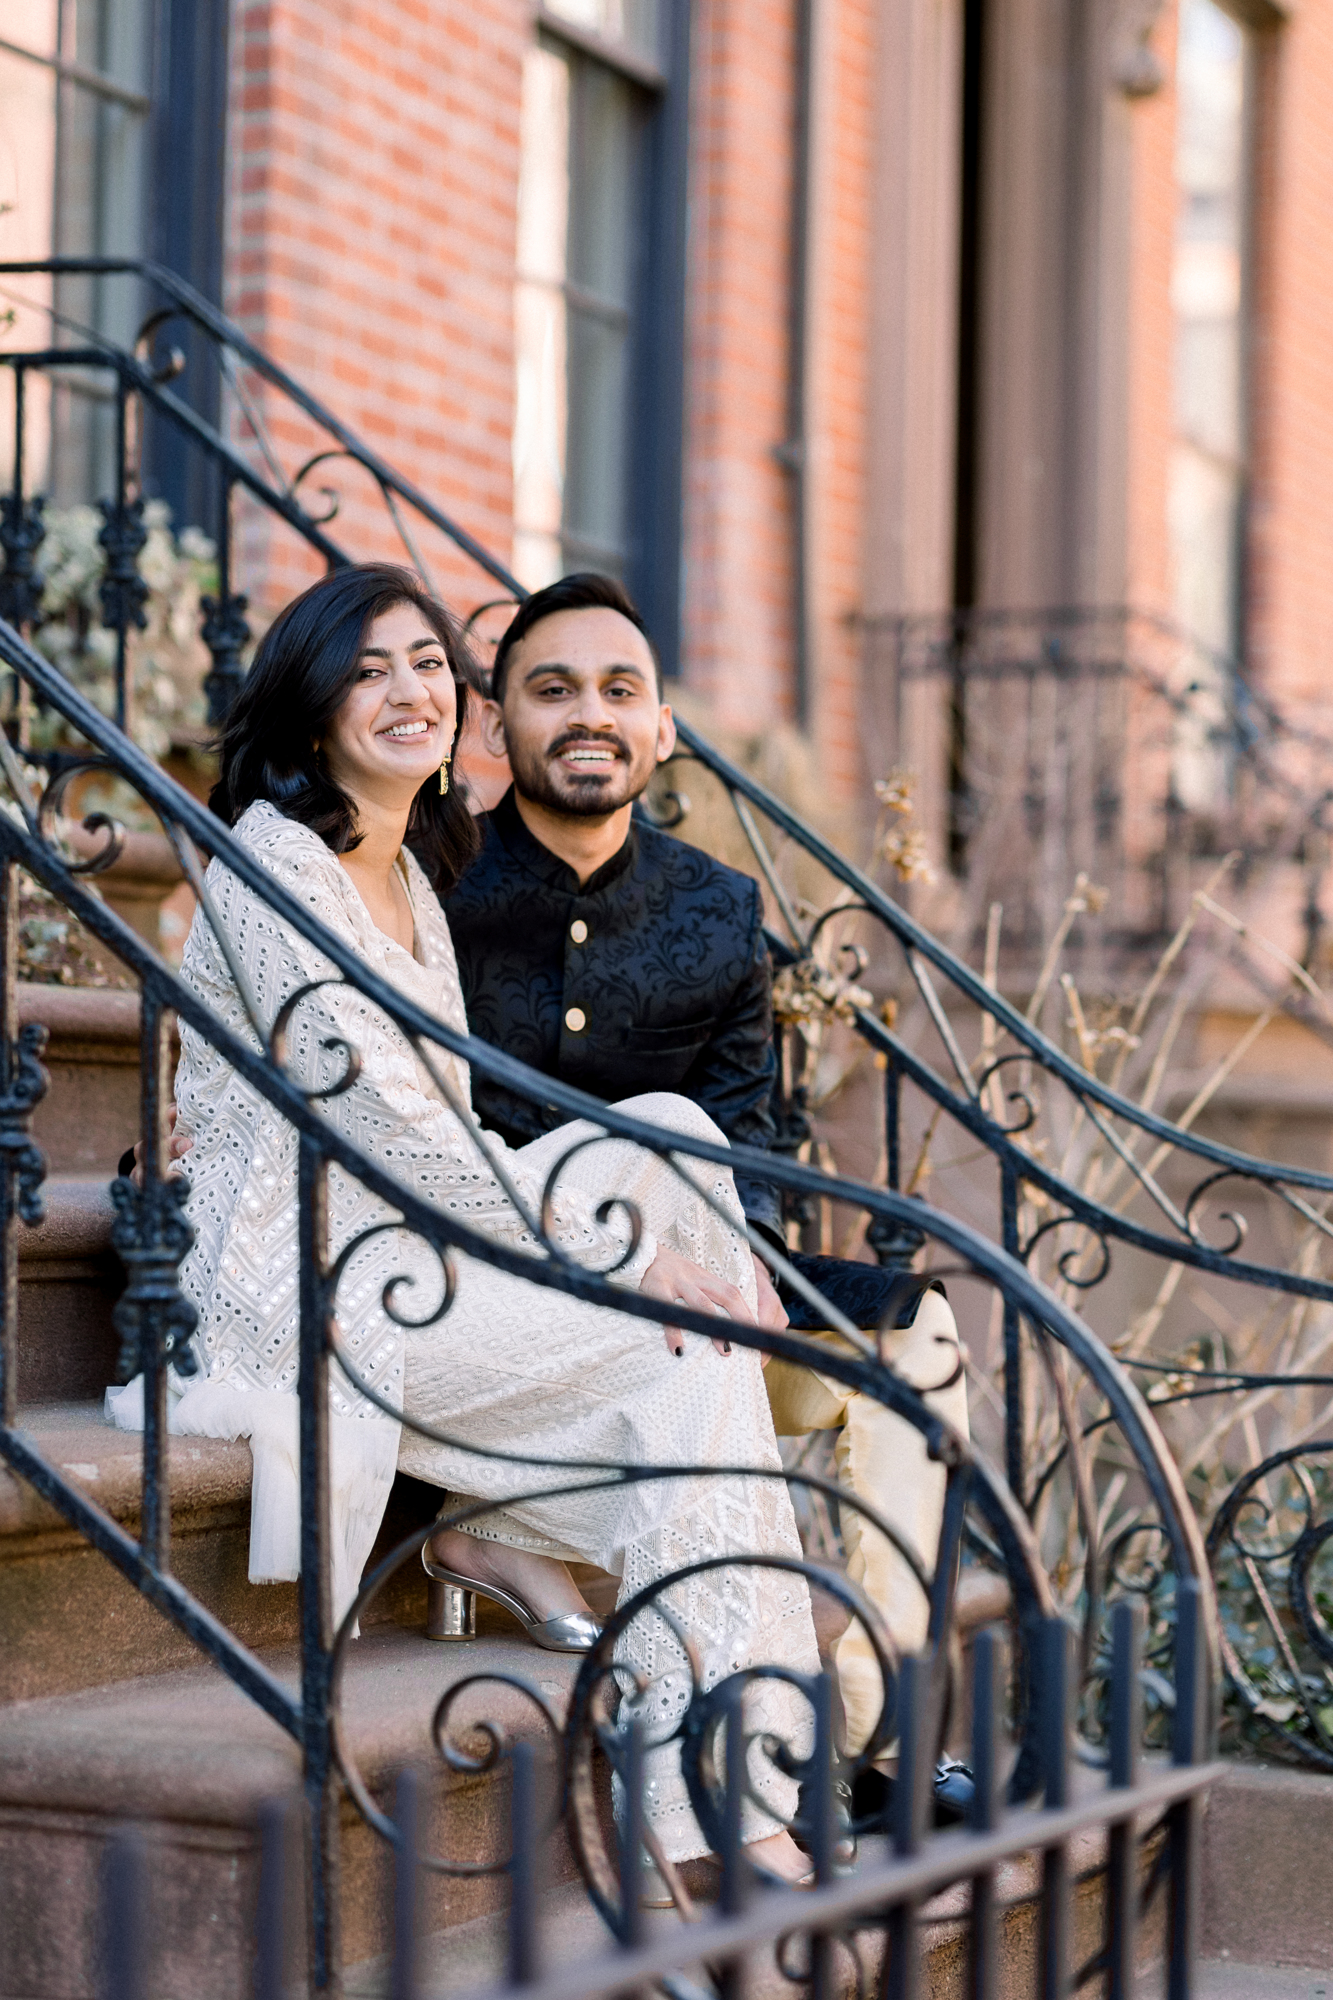 Artistic and Wintery Brooklyn Heights Promenade Engagement Photos